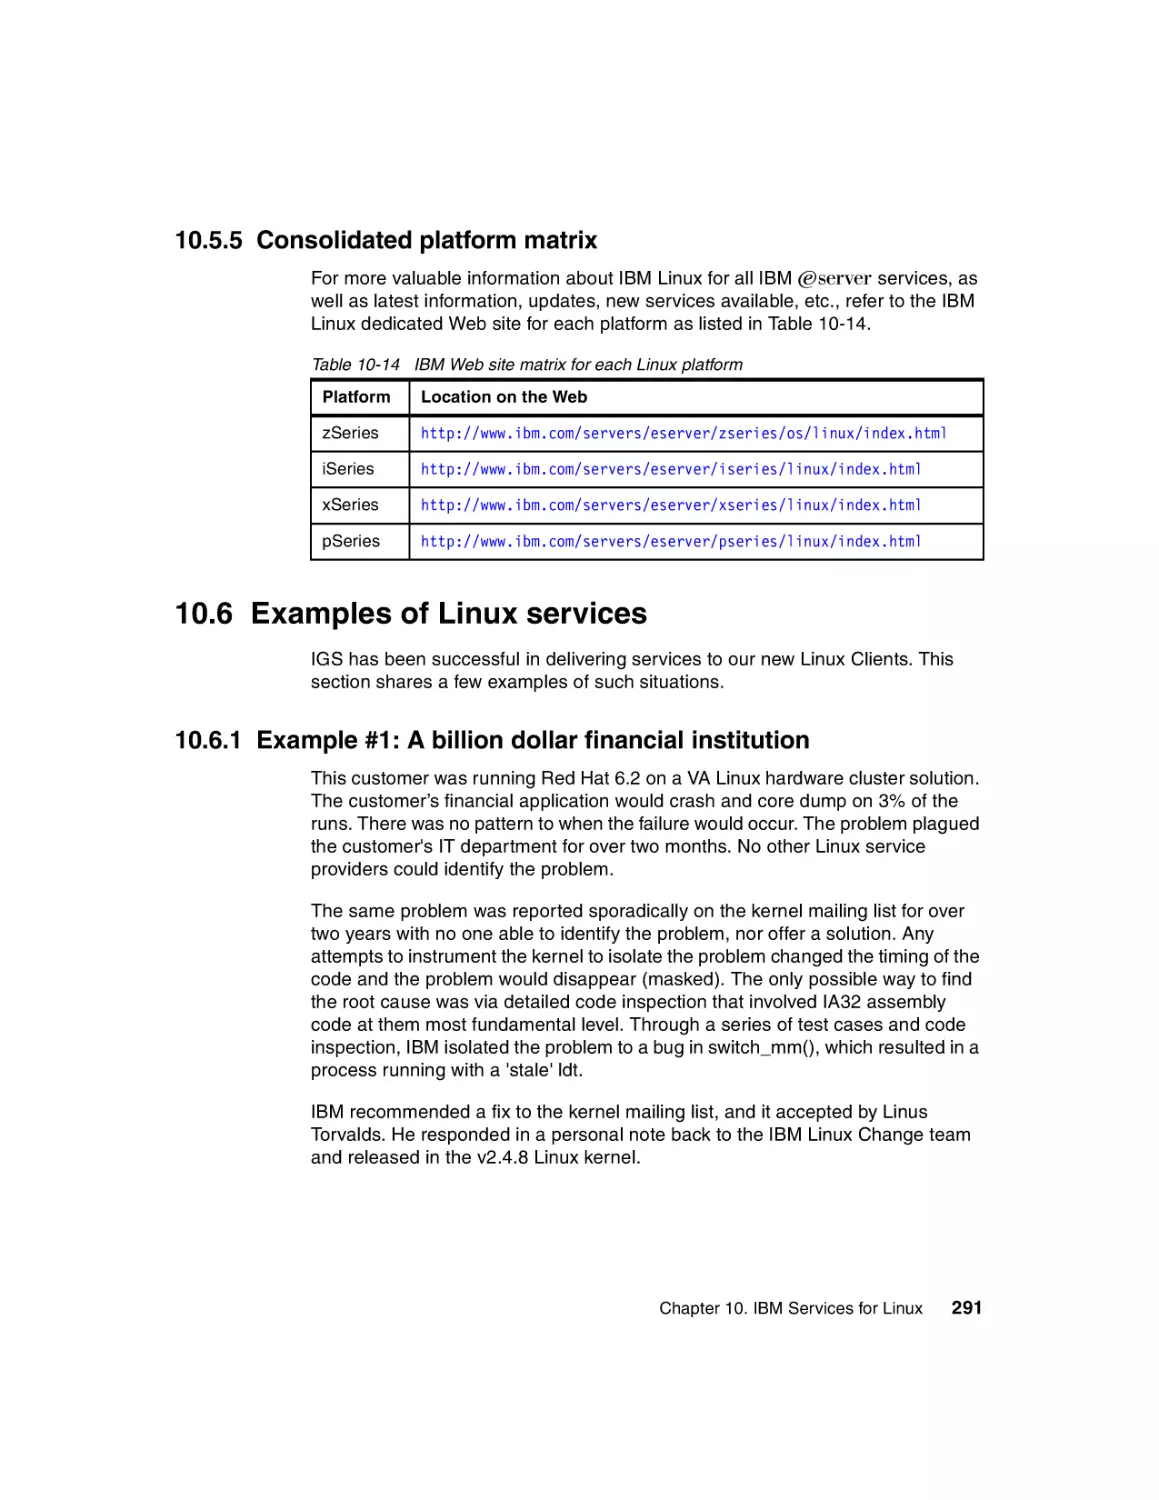 10.5.5 Consolidated platform matrix
10.6 Examples of Linux services
10.6.1 Example #1